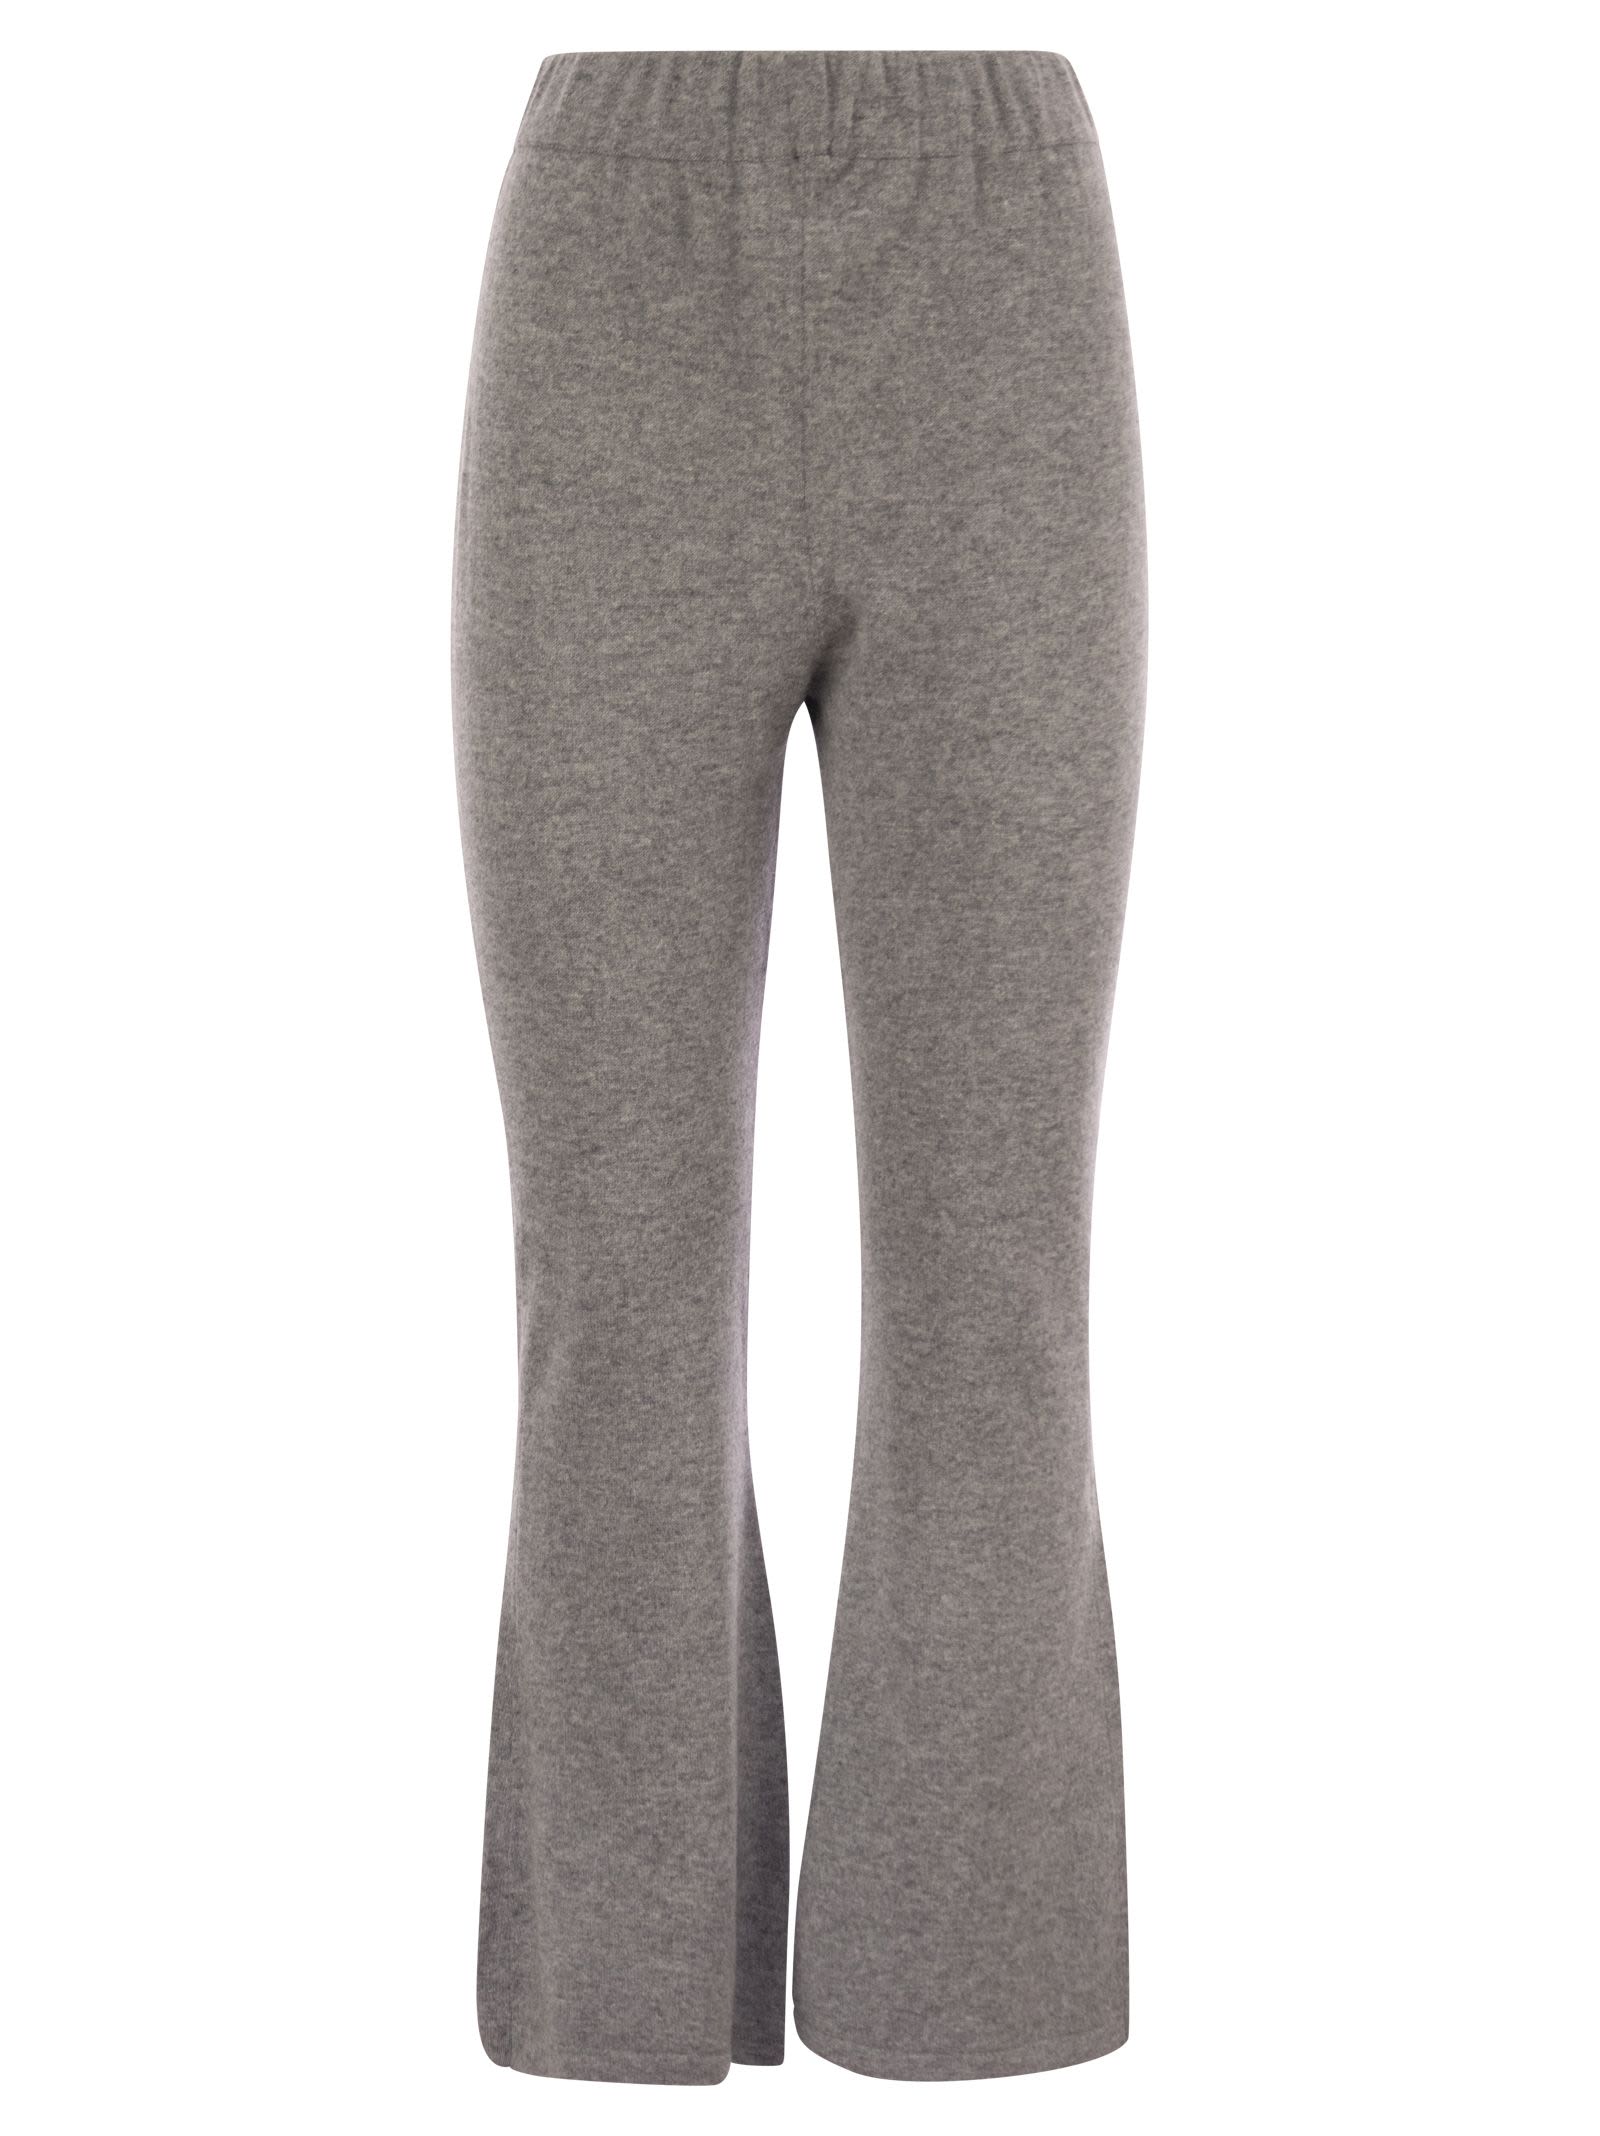 Flair Knit Trousers